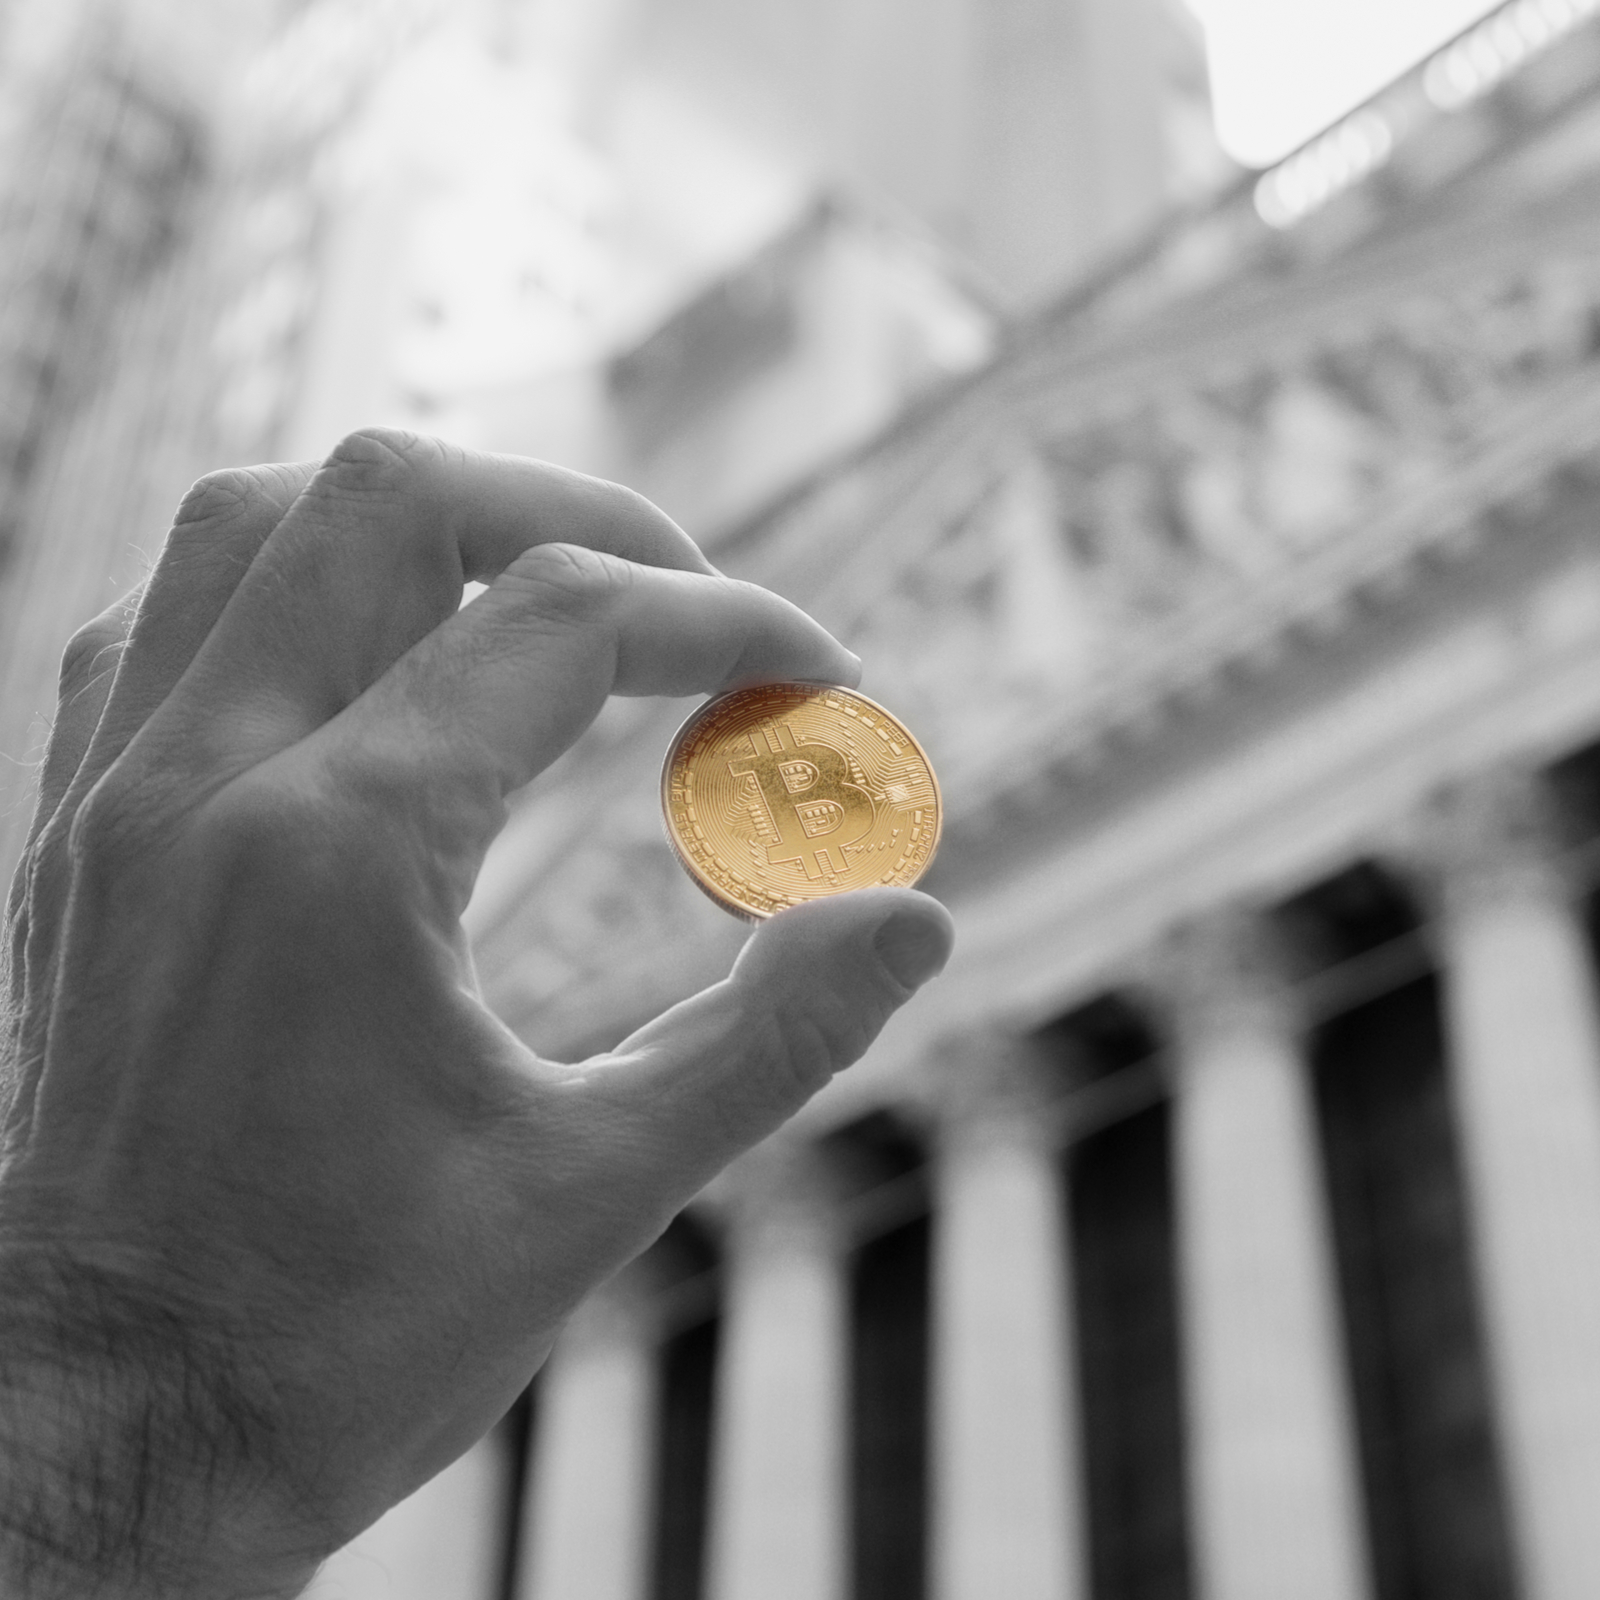 Why Institutional Money is Coming and What This Means for Bitcoin